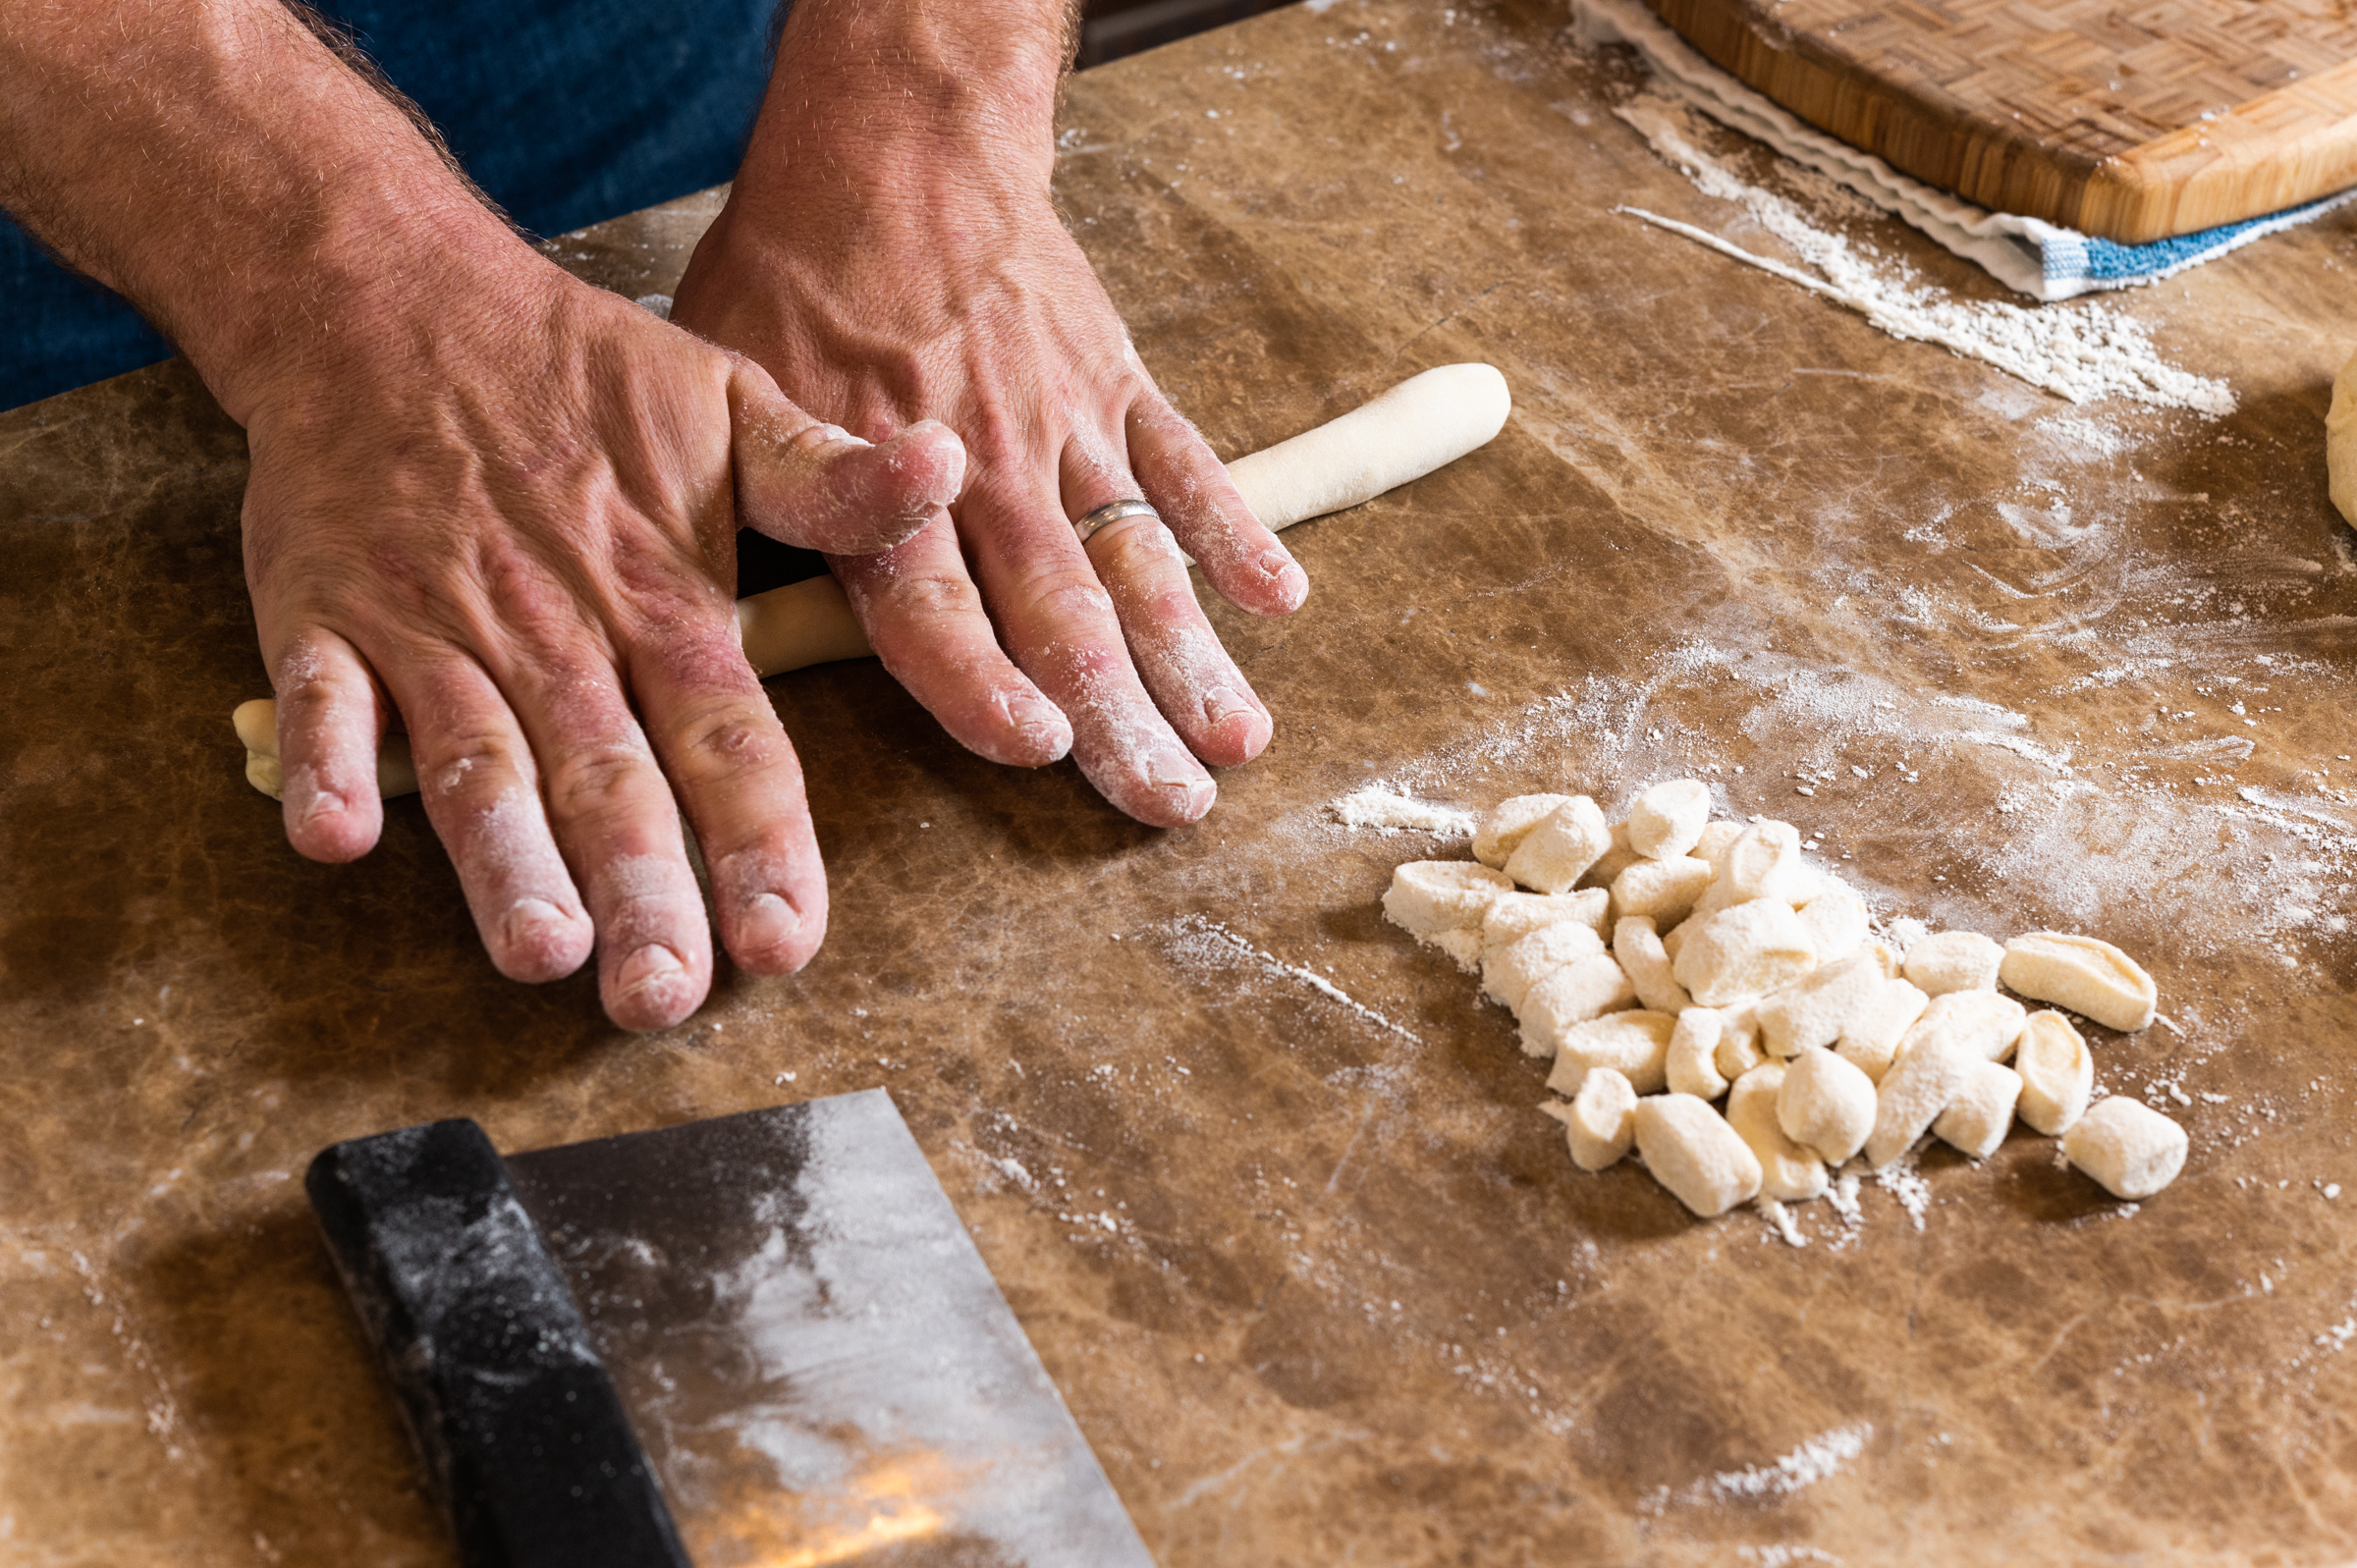 Cavatelli dough made with Creole cream cheese is rolled into long ropes